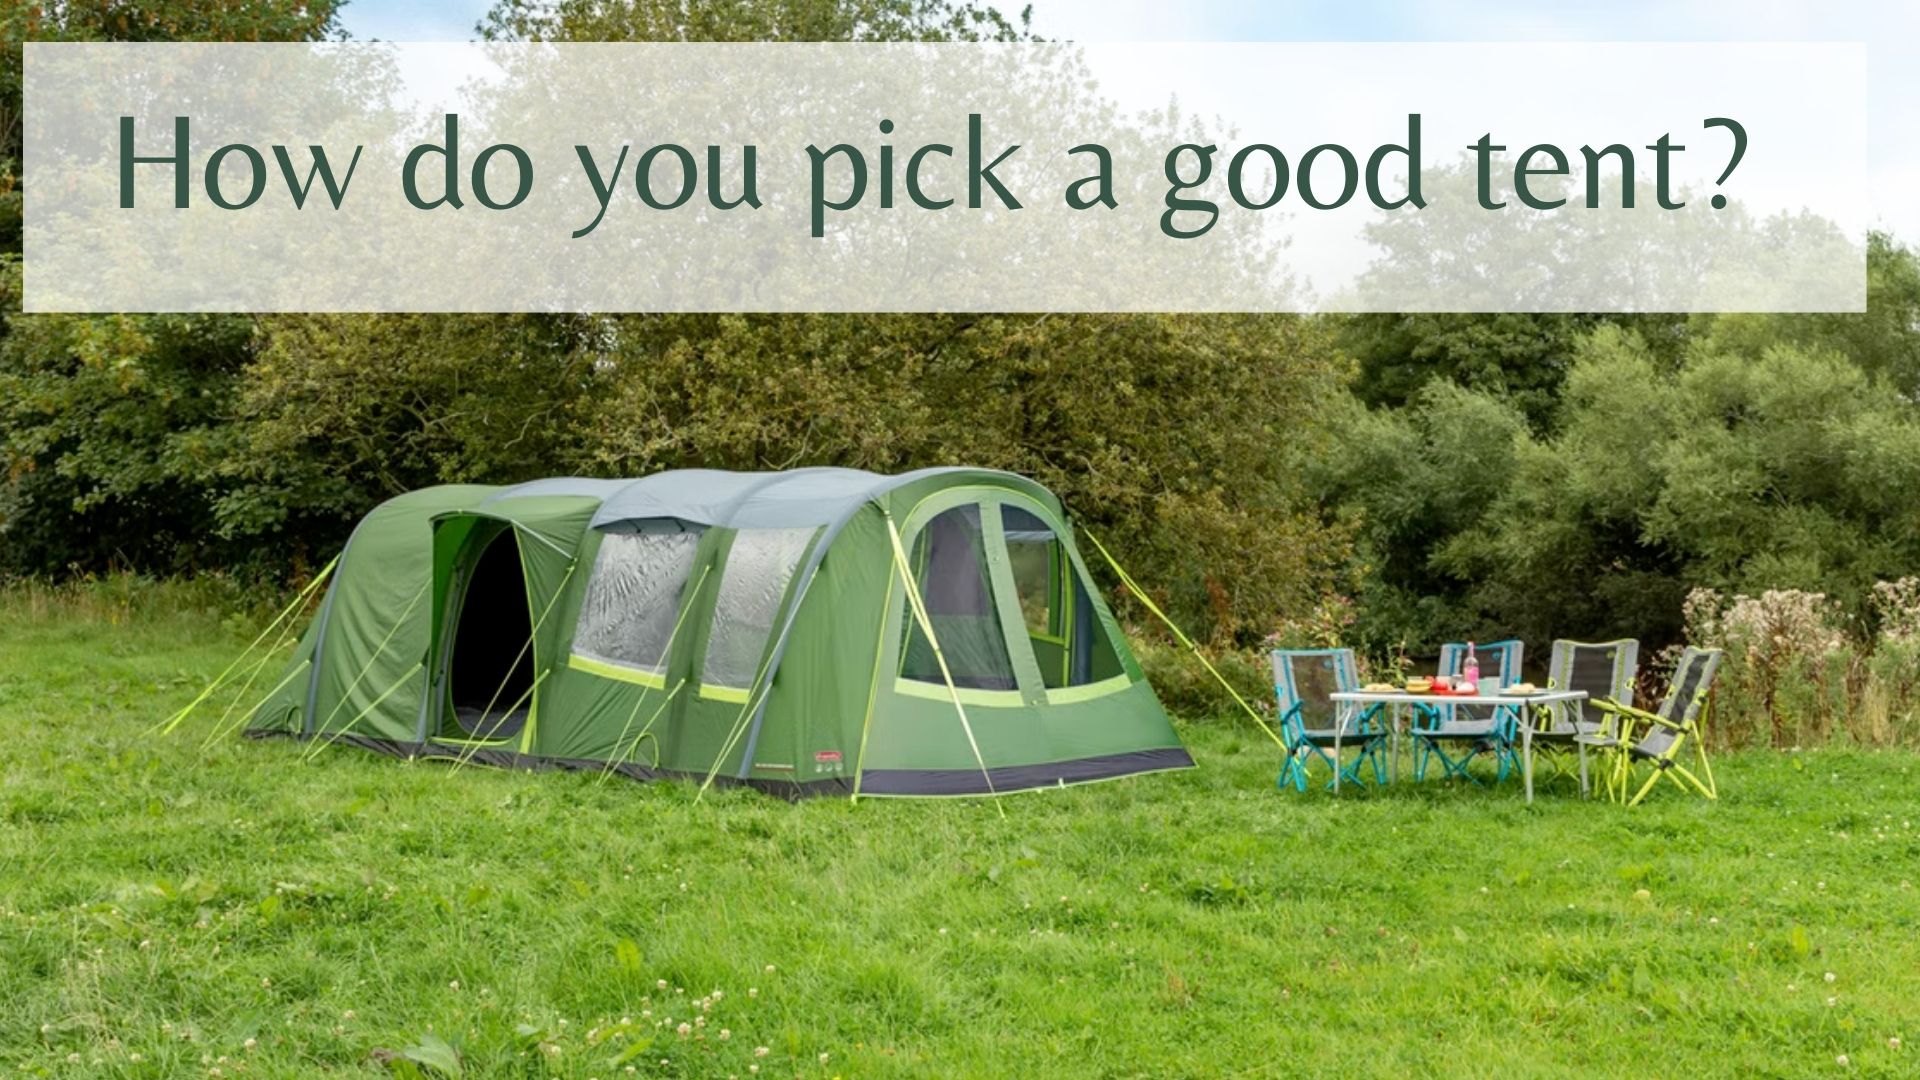 How do you pick a good tent?